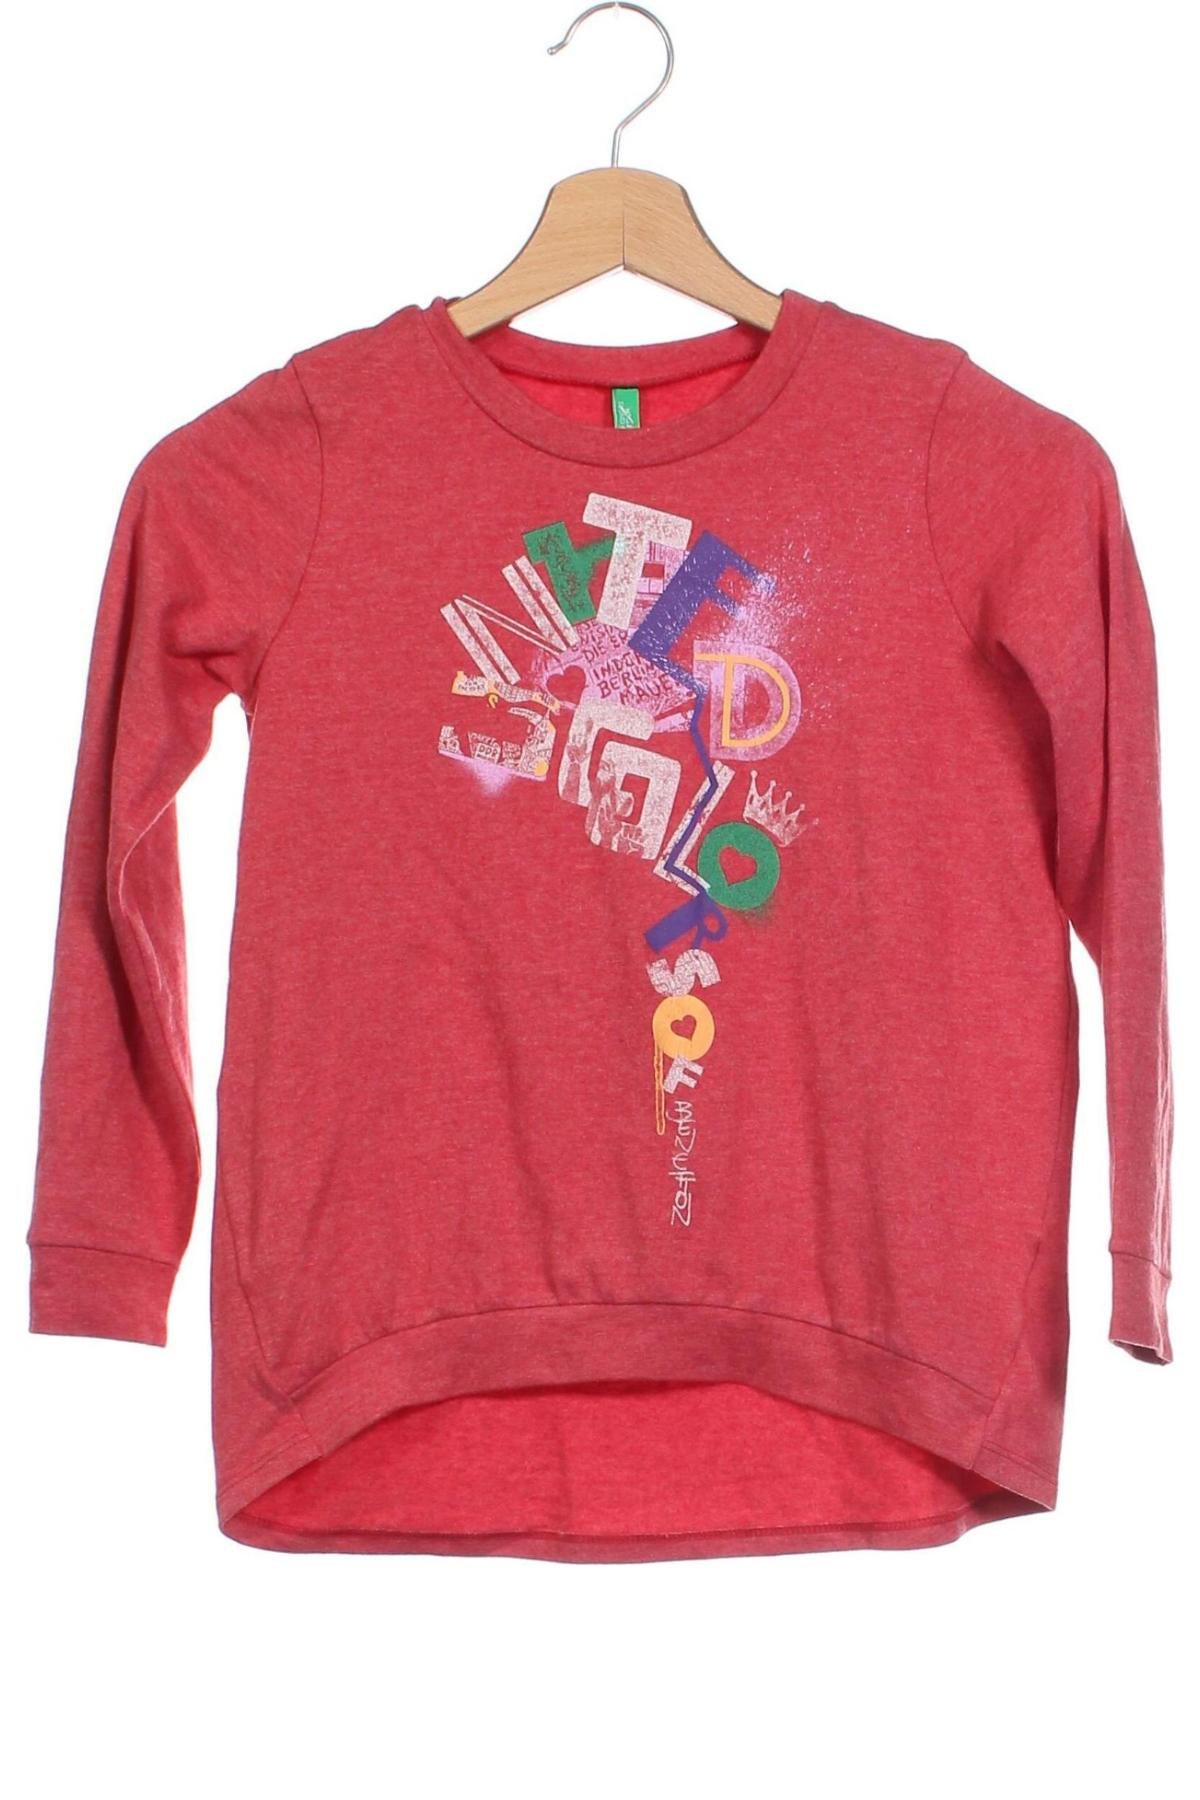 Kinder Shirt United Colors Of Benetton, Größe 8-9y/ 134-140 cm, Farbe Rot, Preis 6,75 €